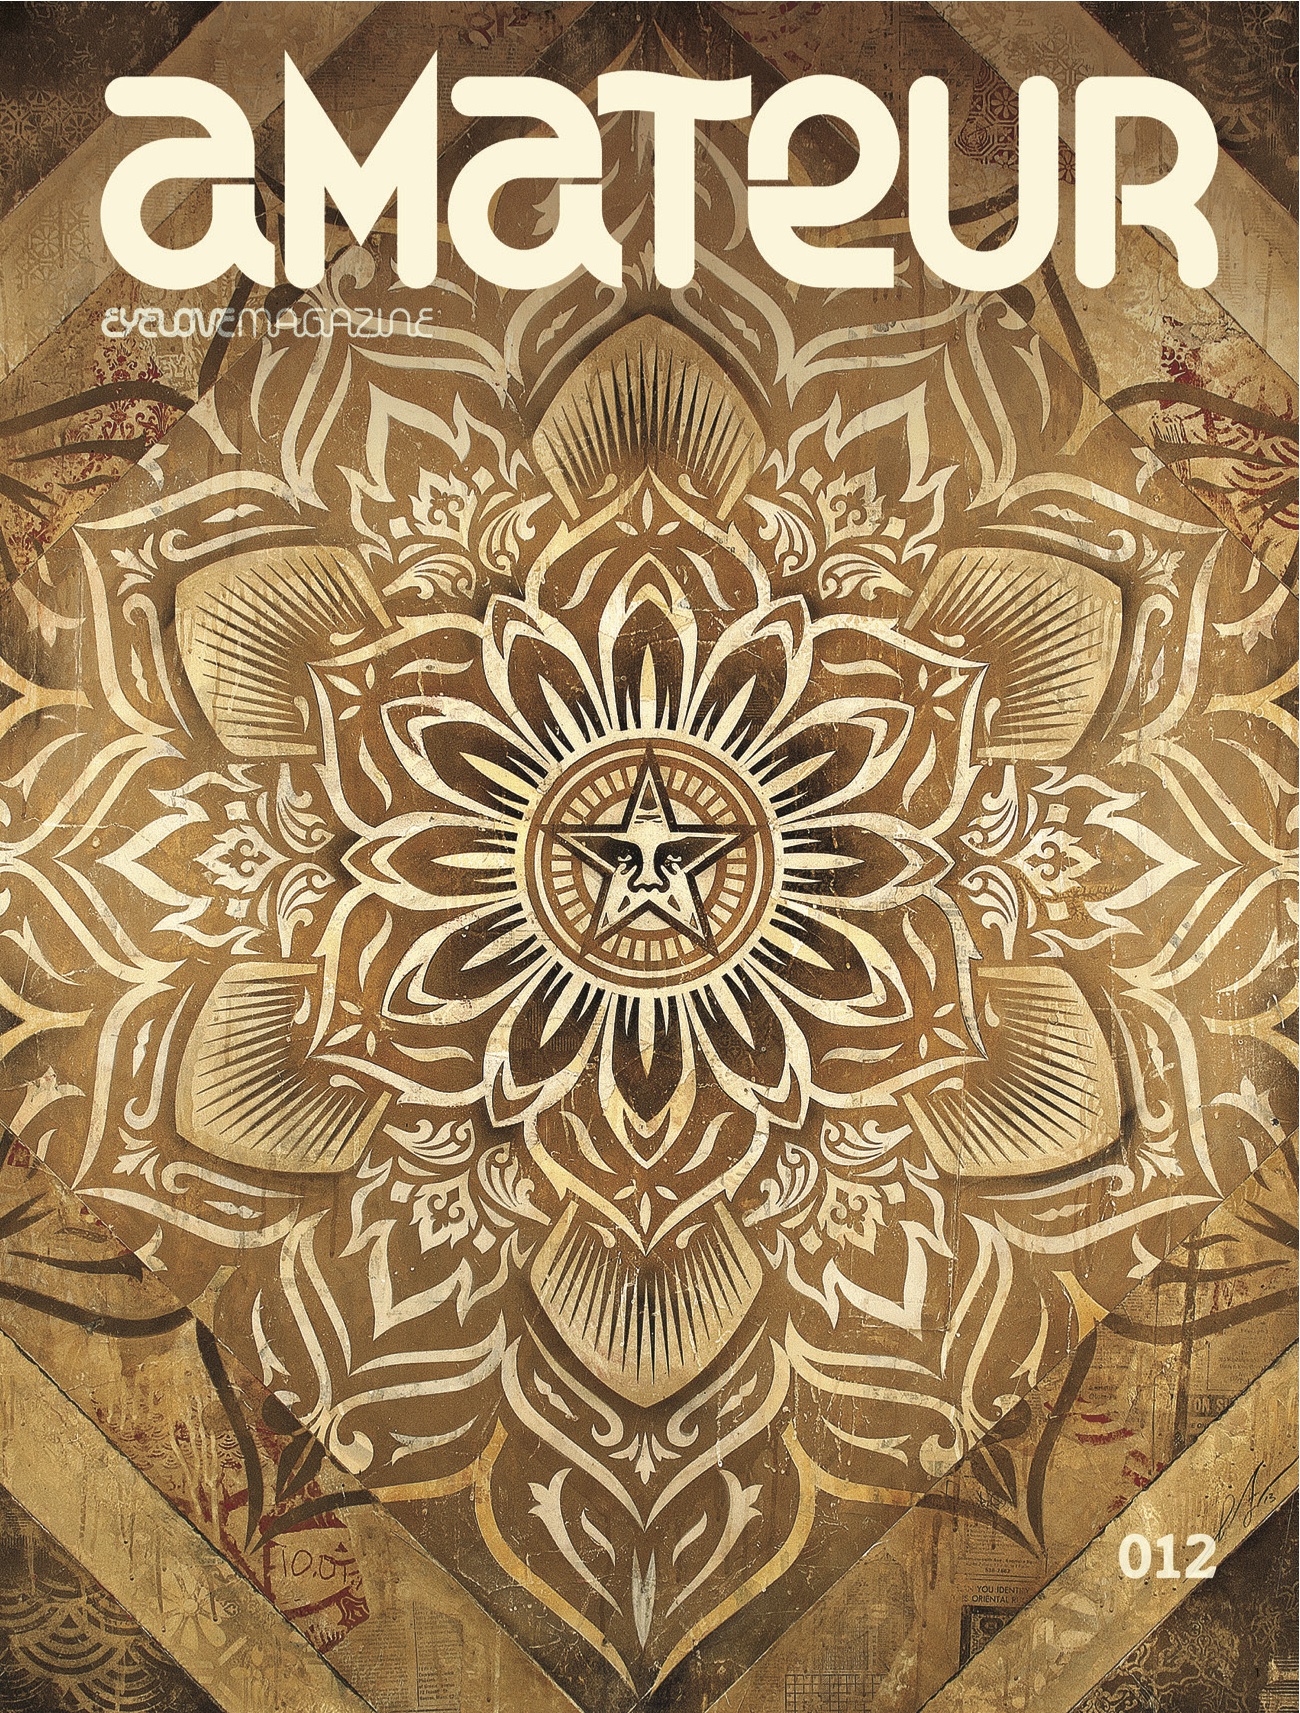 Ltd.Edition 2013 in AMATEUR MAGAZINE issue 012 *cover